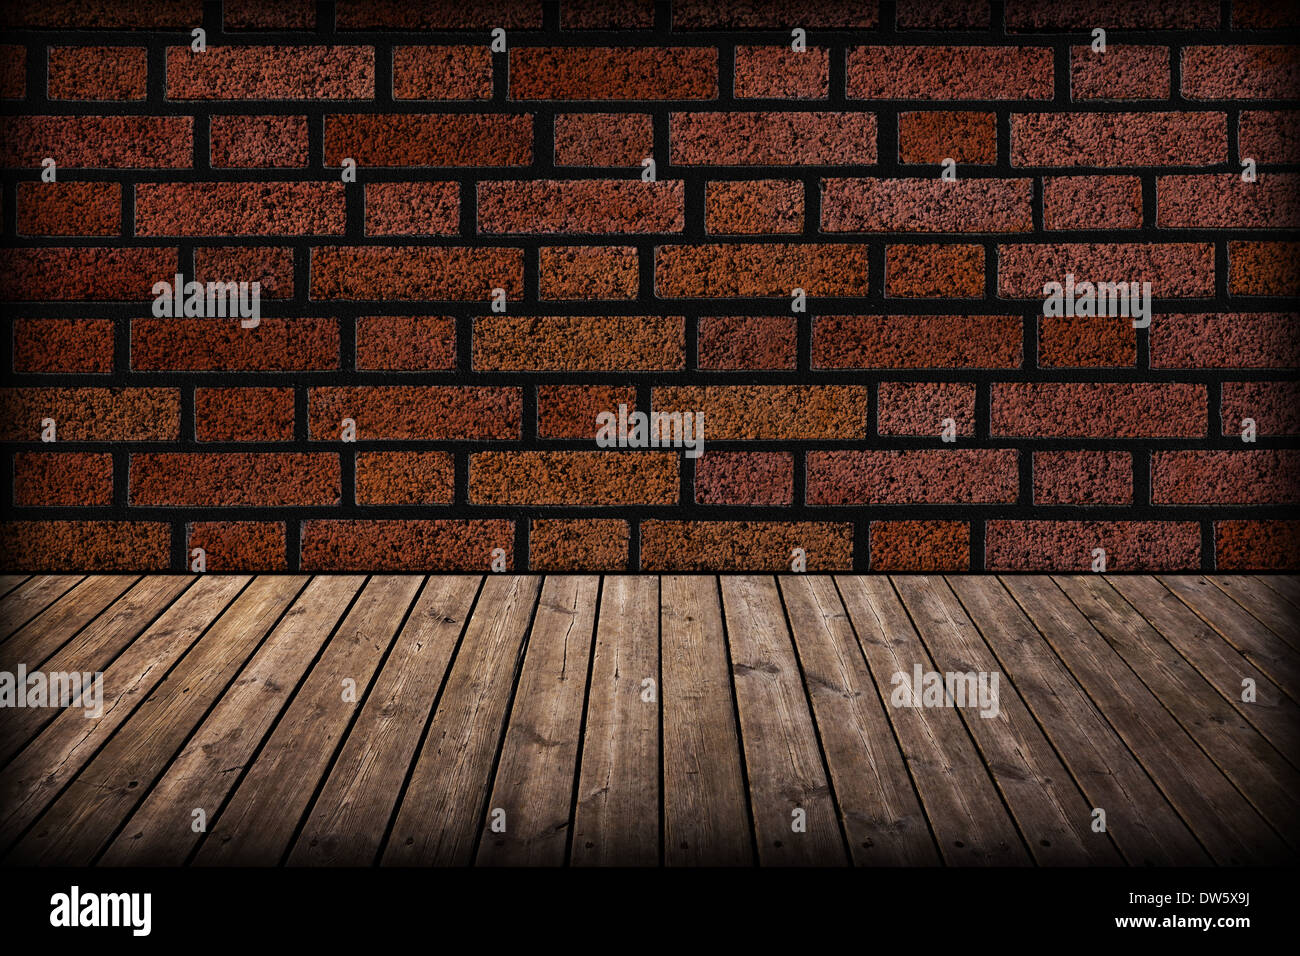 Grunge brick wall and wooden floor in a room Stock Photo - Alamy